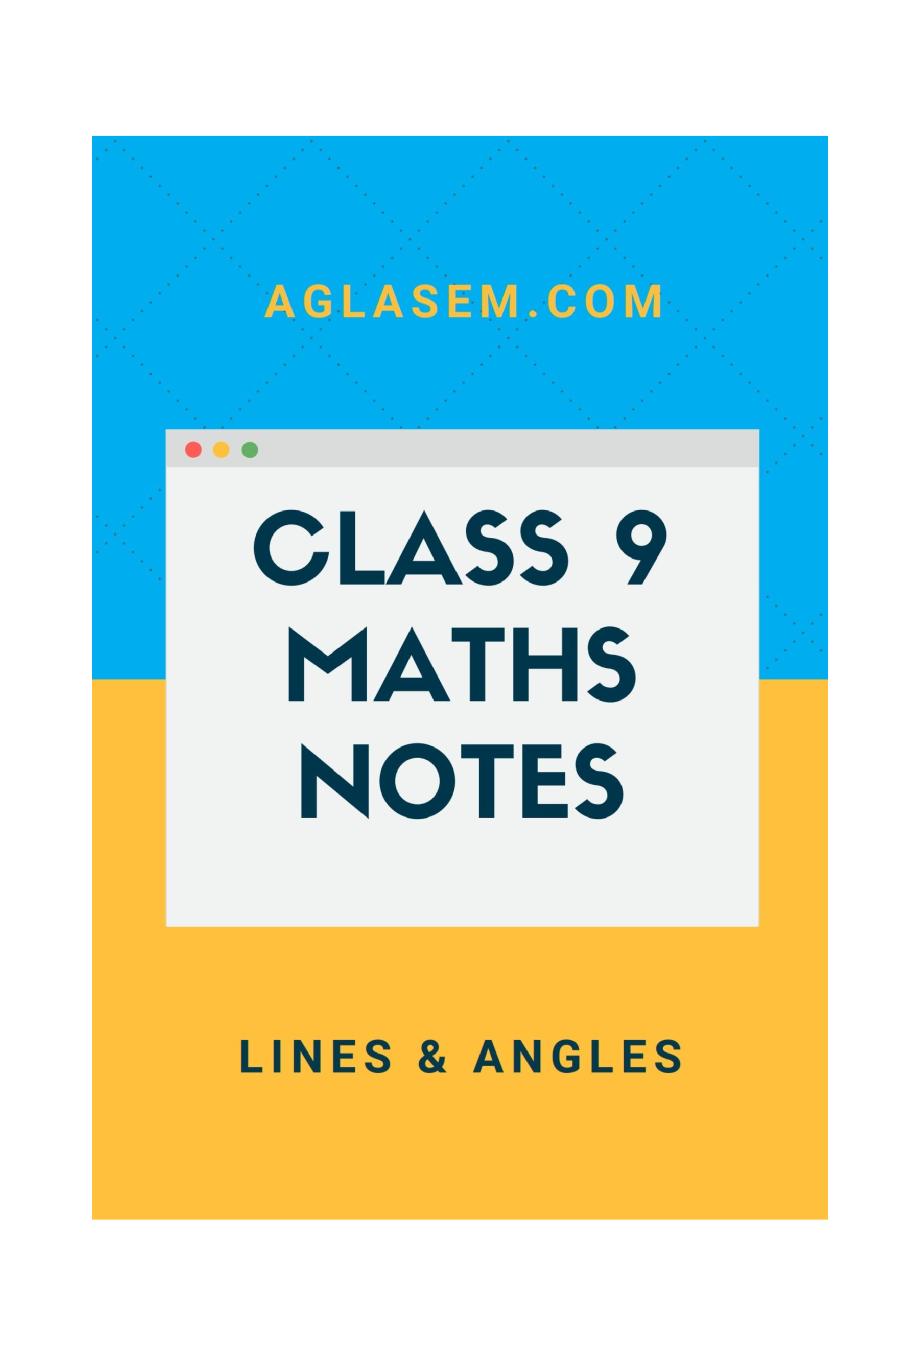 Class 9 Maths Notes for Lines and Angles - Page 1